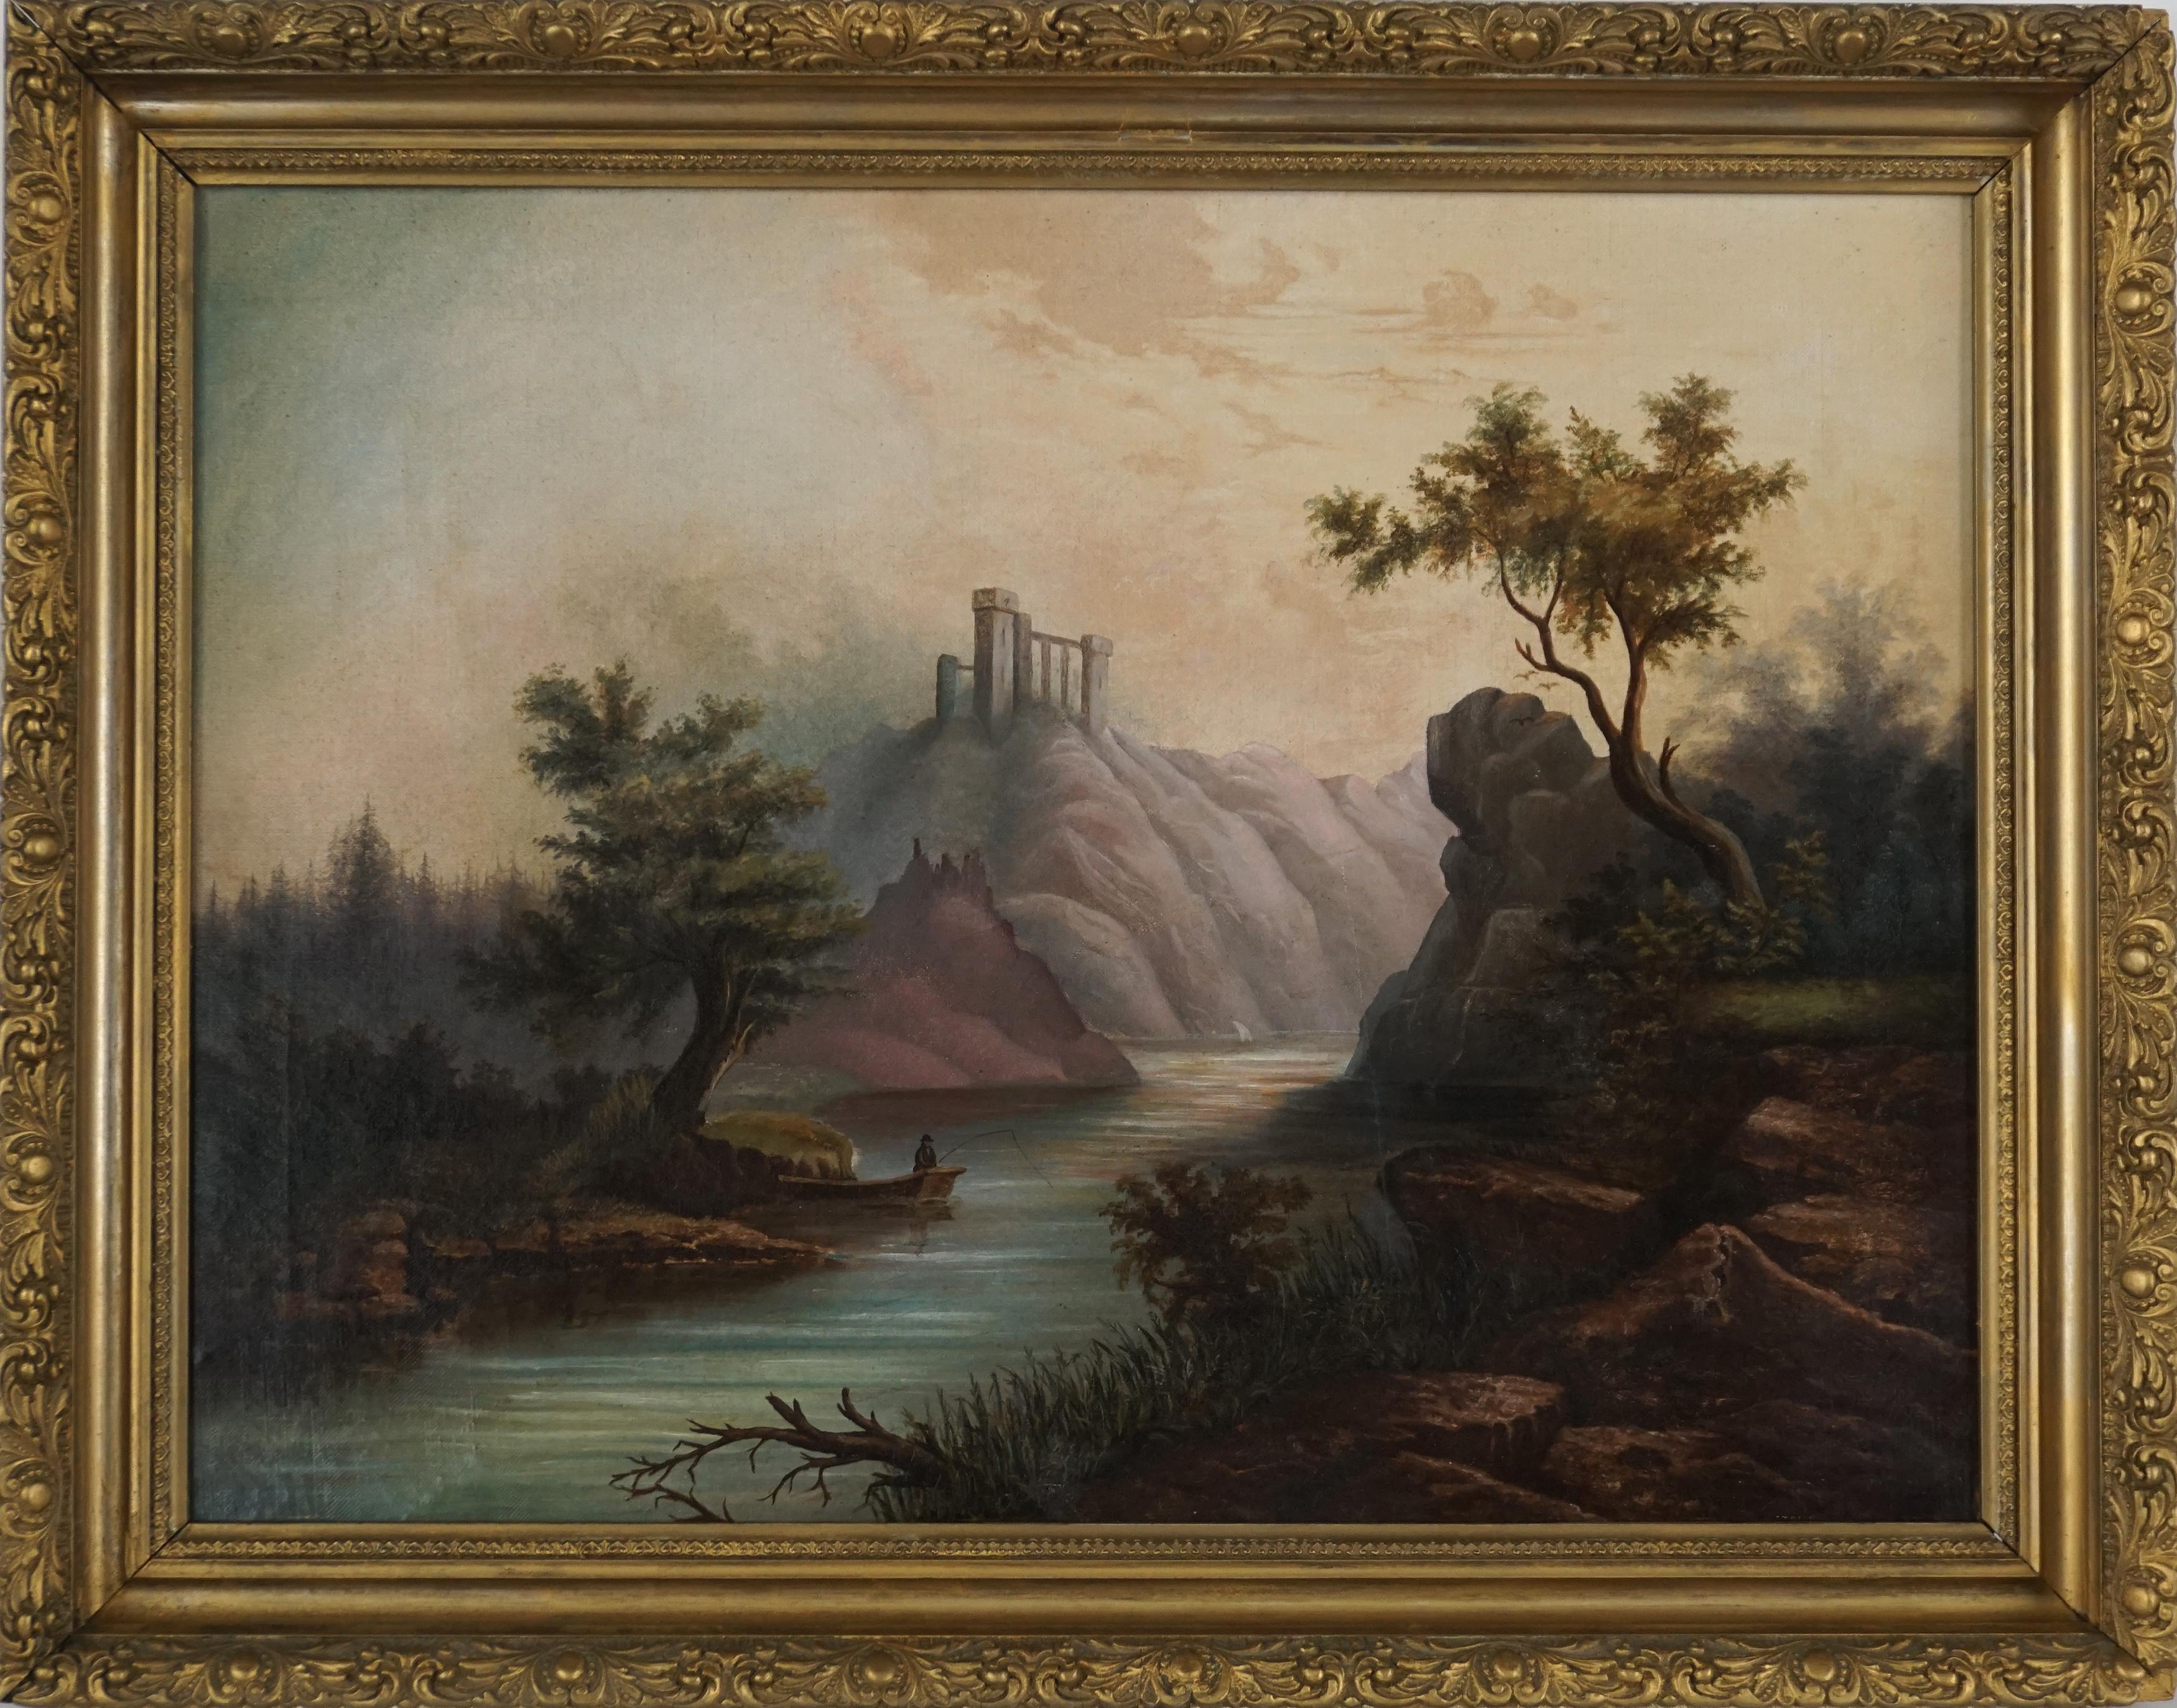 Unknown Landscape Painting - 19th Century Original Scottish Loch Painting in the style of Alexander Nasmyth 